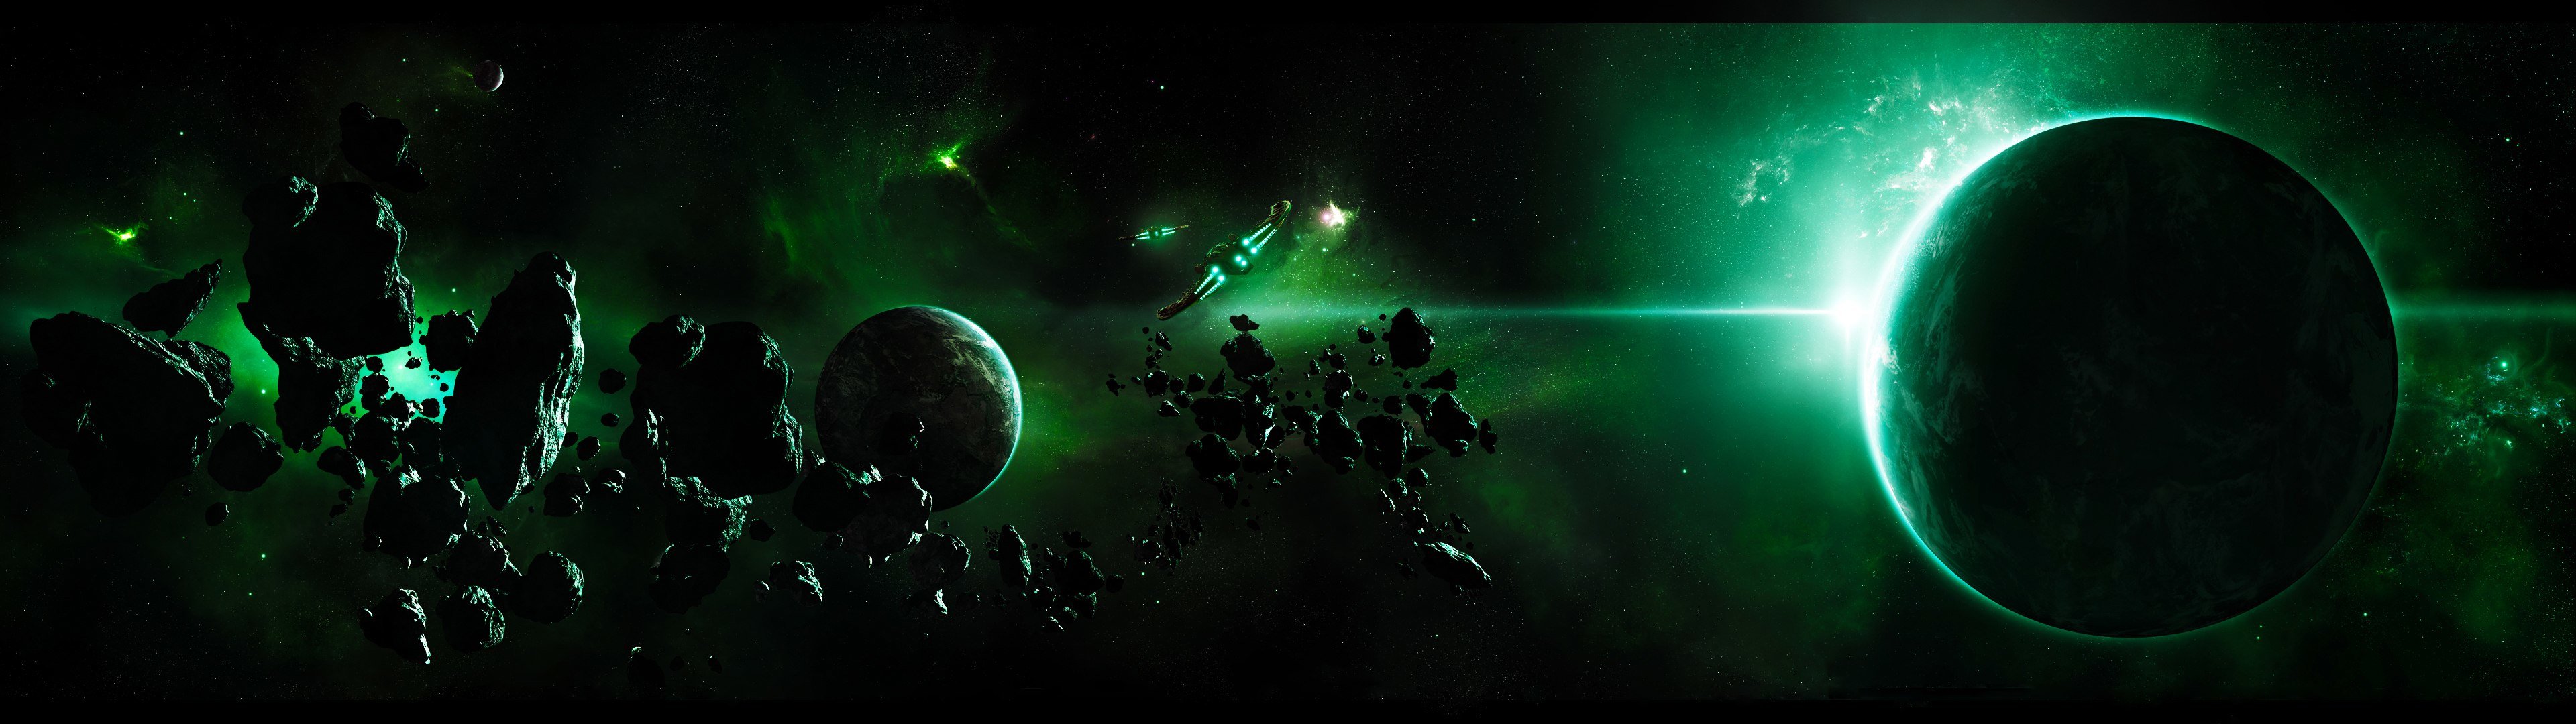 Download dual screen 3840x1080 Planets desktop background ID:153566 for free